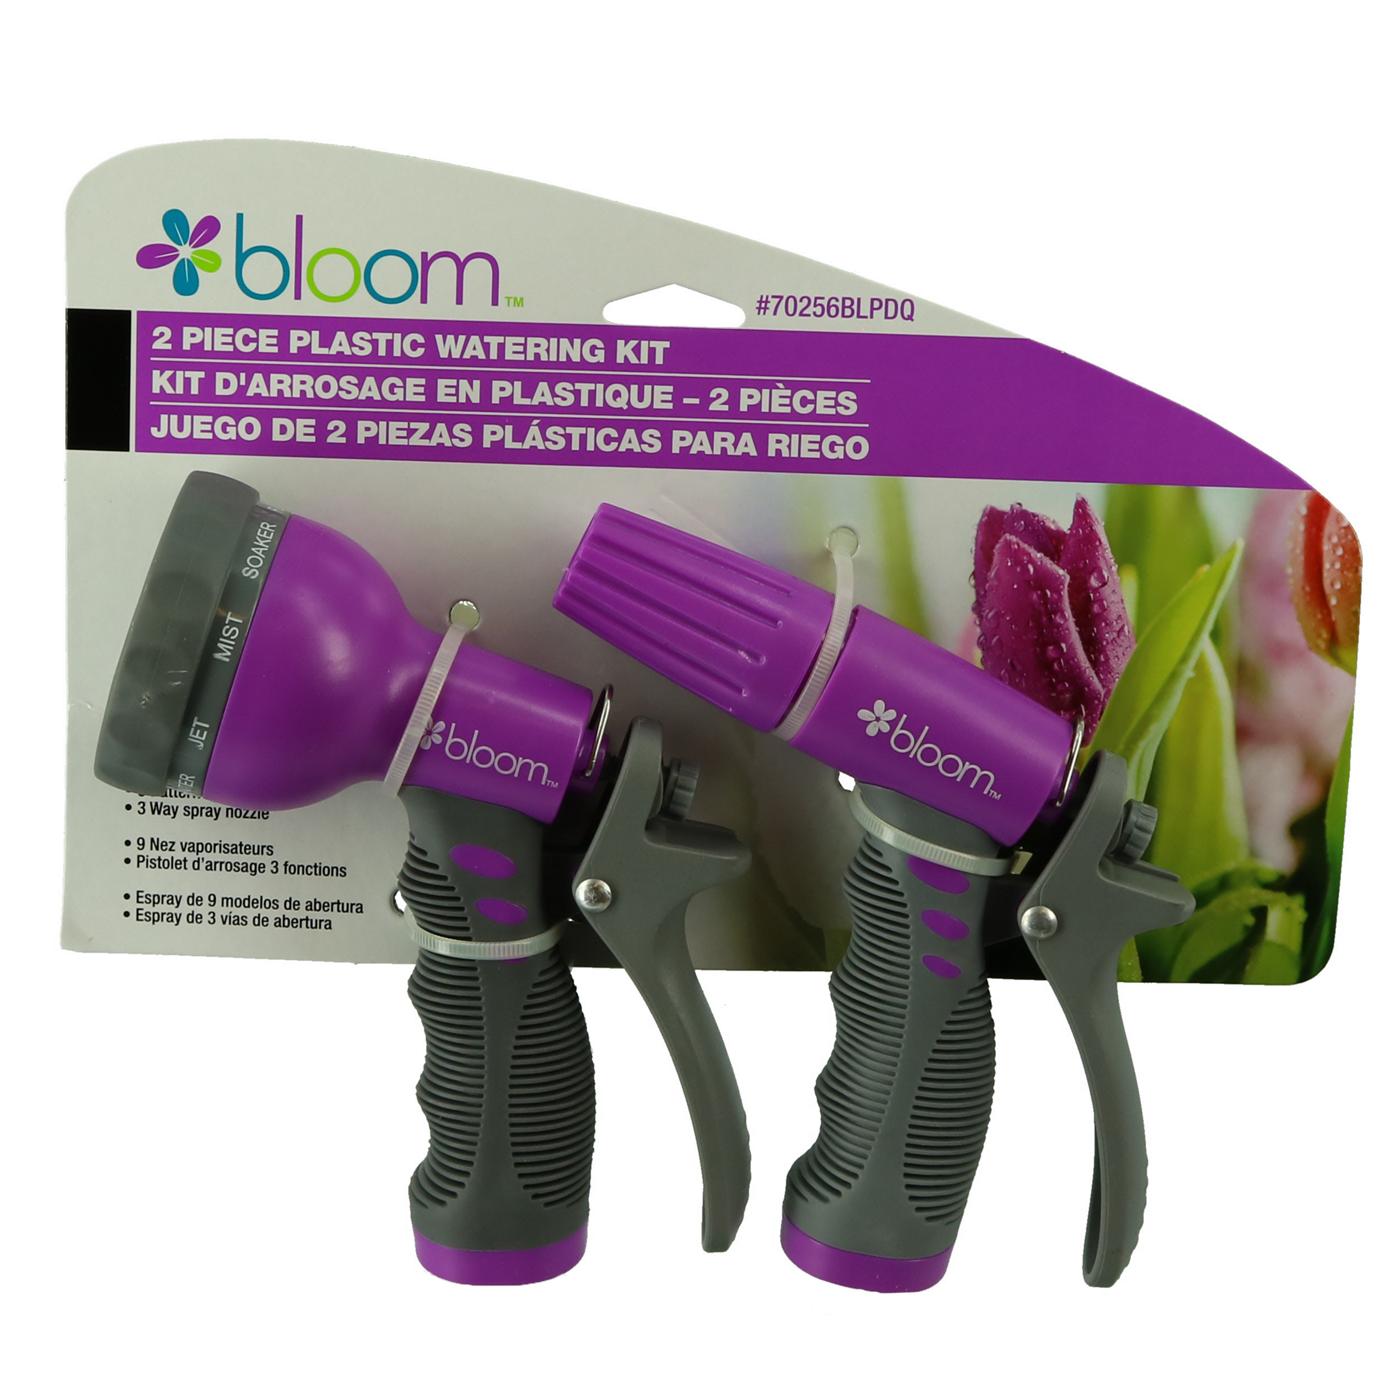 Bloom Plastic Watering Nozzle Kit, Colors May Vary; image 2 of 3